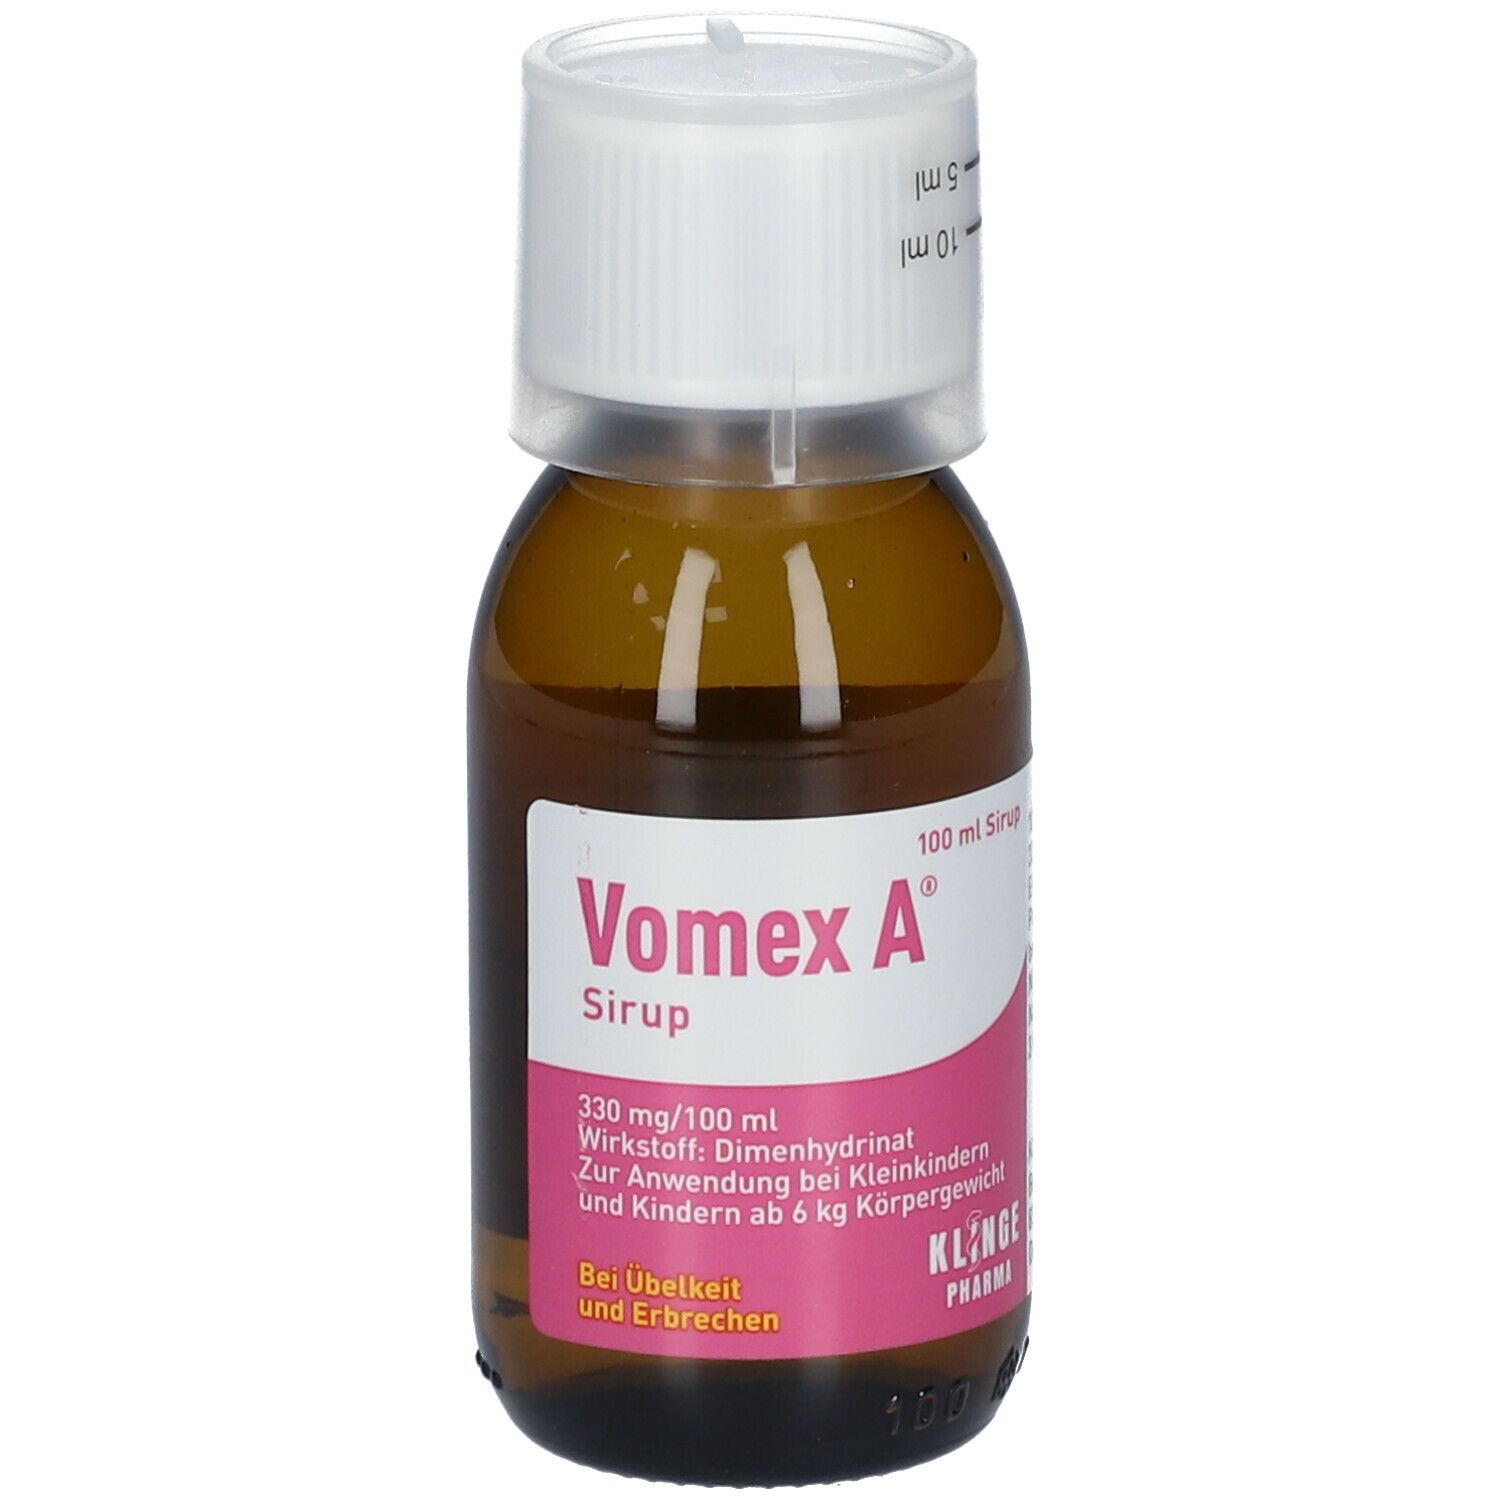 Vomex A® Sirup